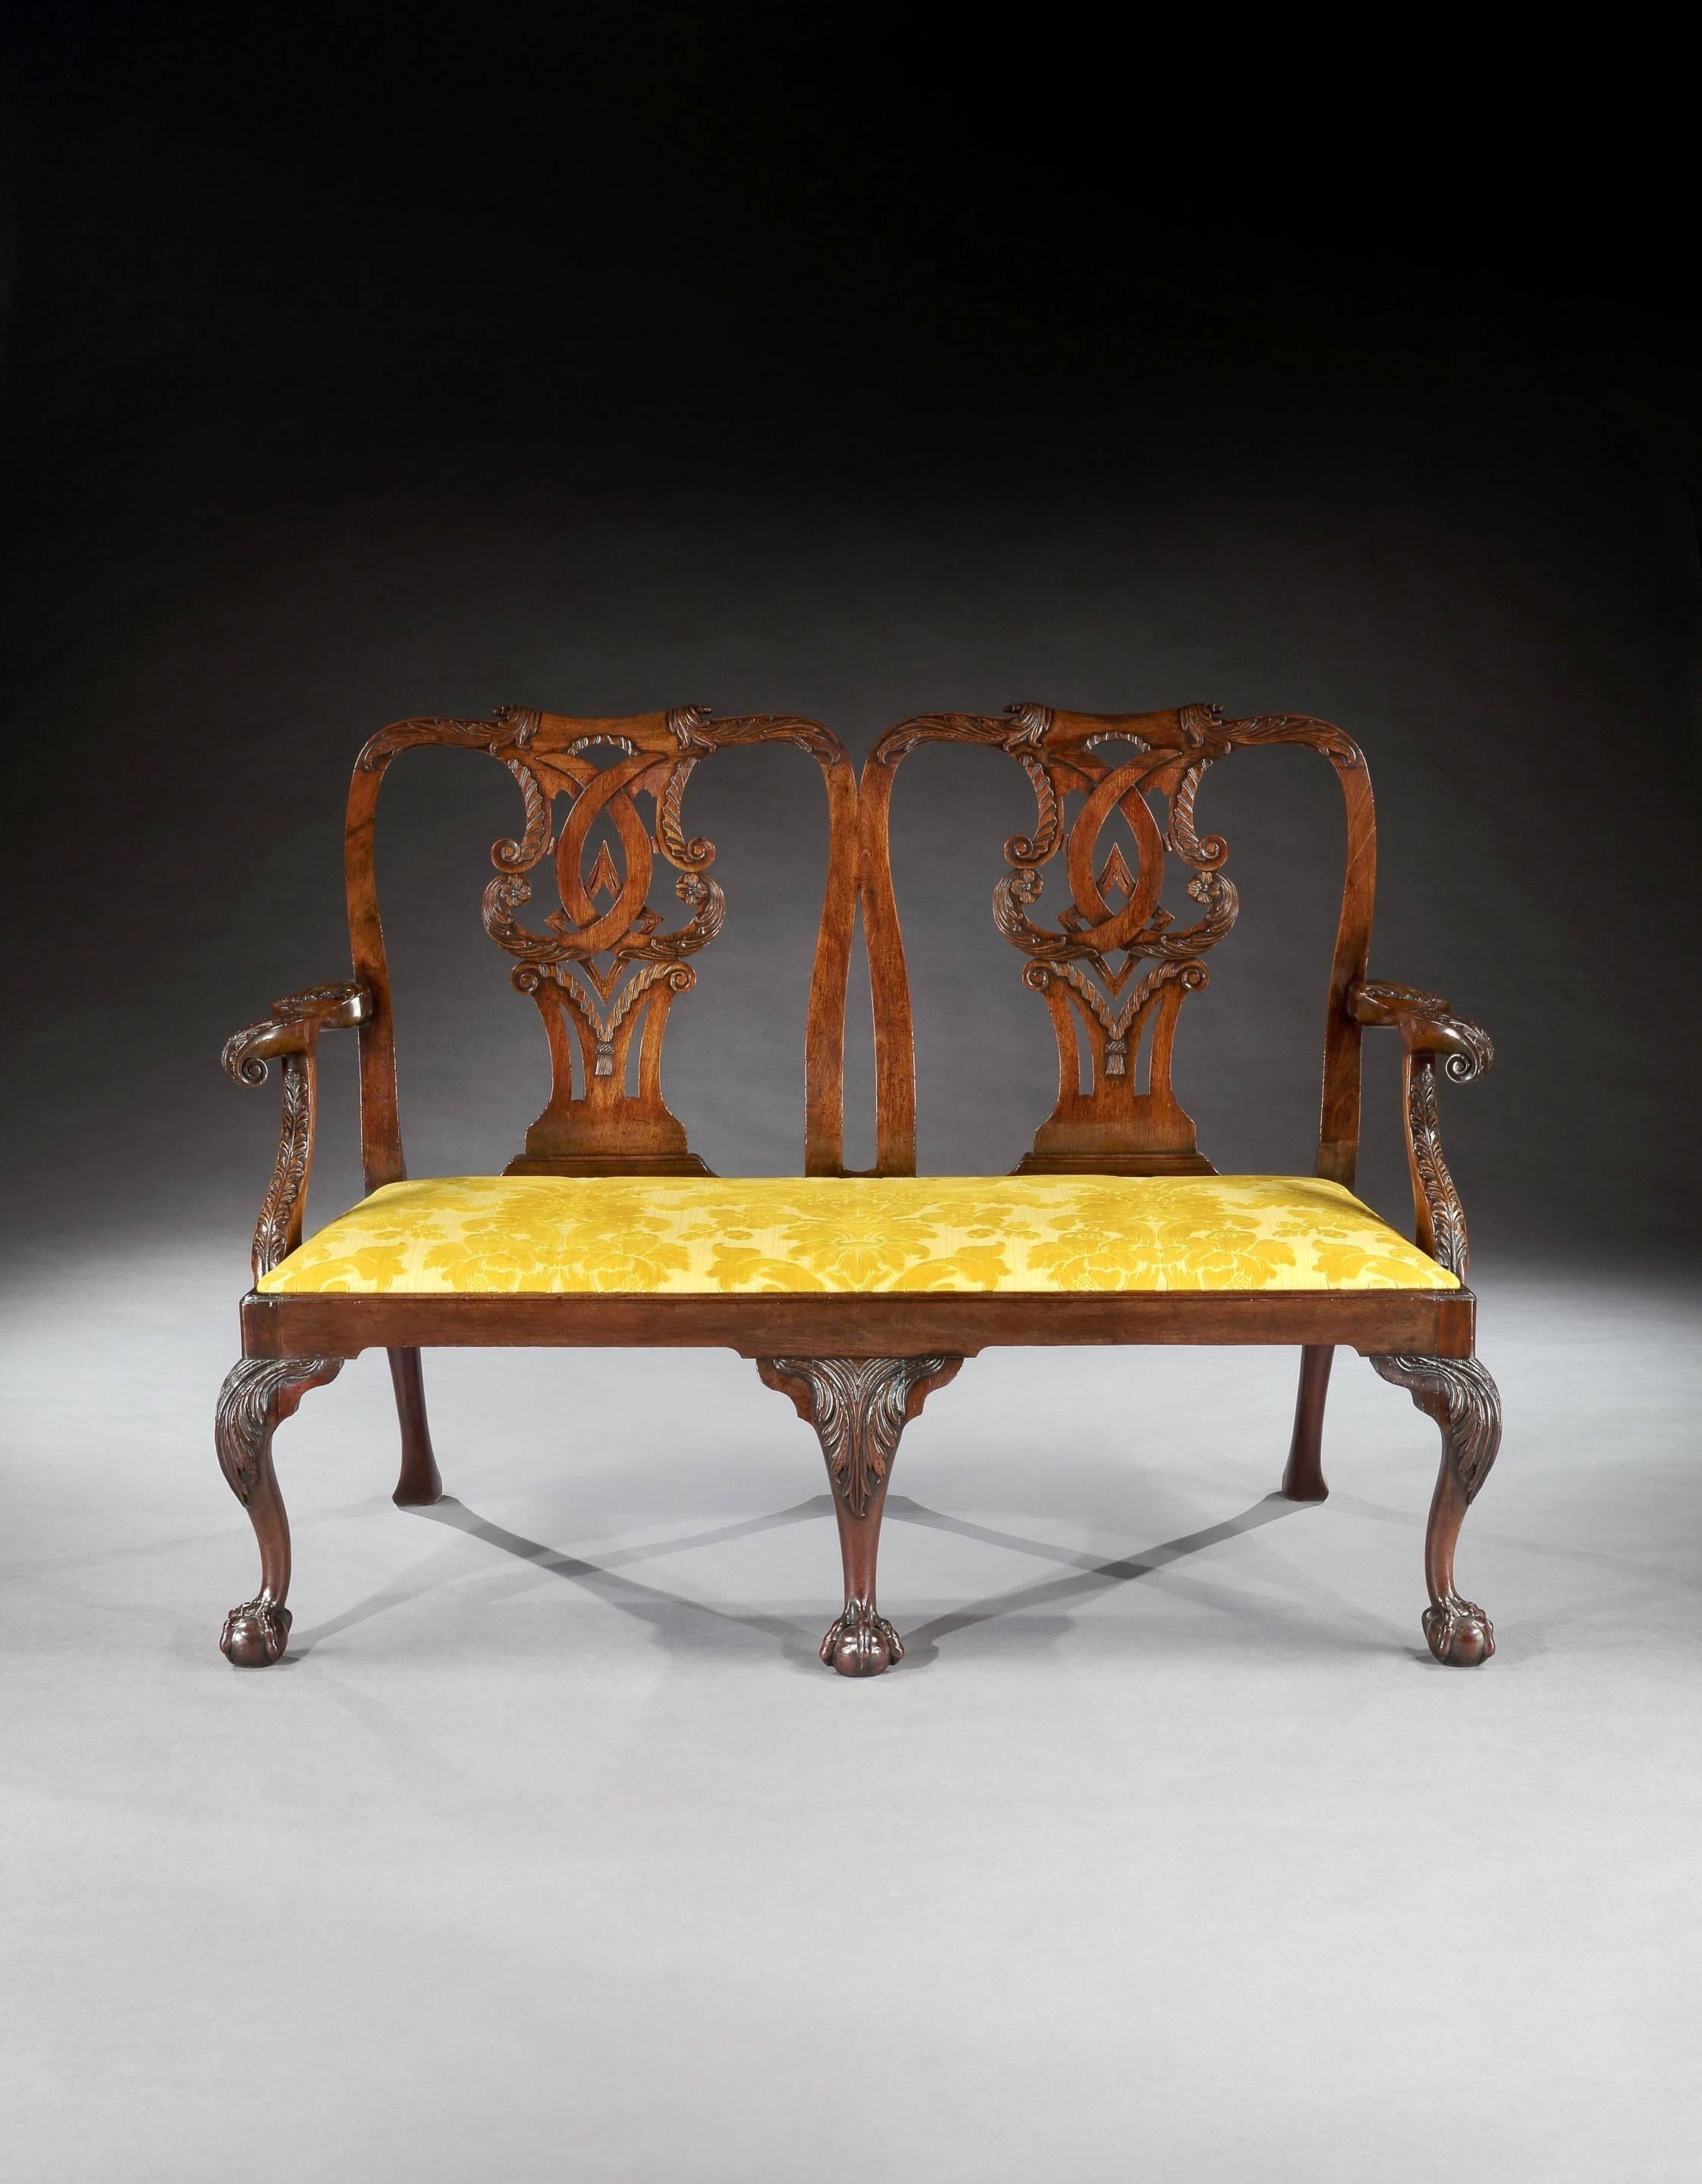 The center back leg of the settee is a restoration. 

The chairs:
Height: 39 in; 99 cm.
Height of seat: 18½ in; 47 cm.
Width: 23 in; 58.5 cm.
Depth: 22 in; 56 cm. 

Price: £100,000 + 

The settee: 
Height: 41½ in; 105.5 cm. 
Height of